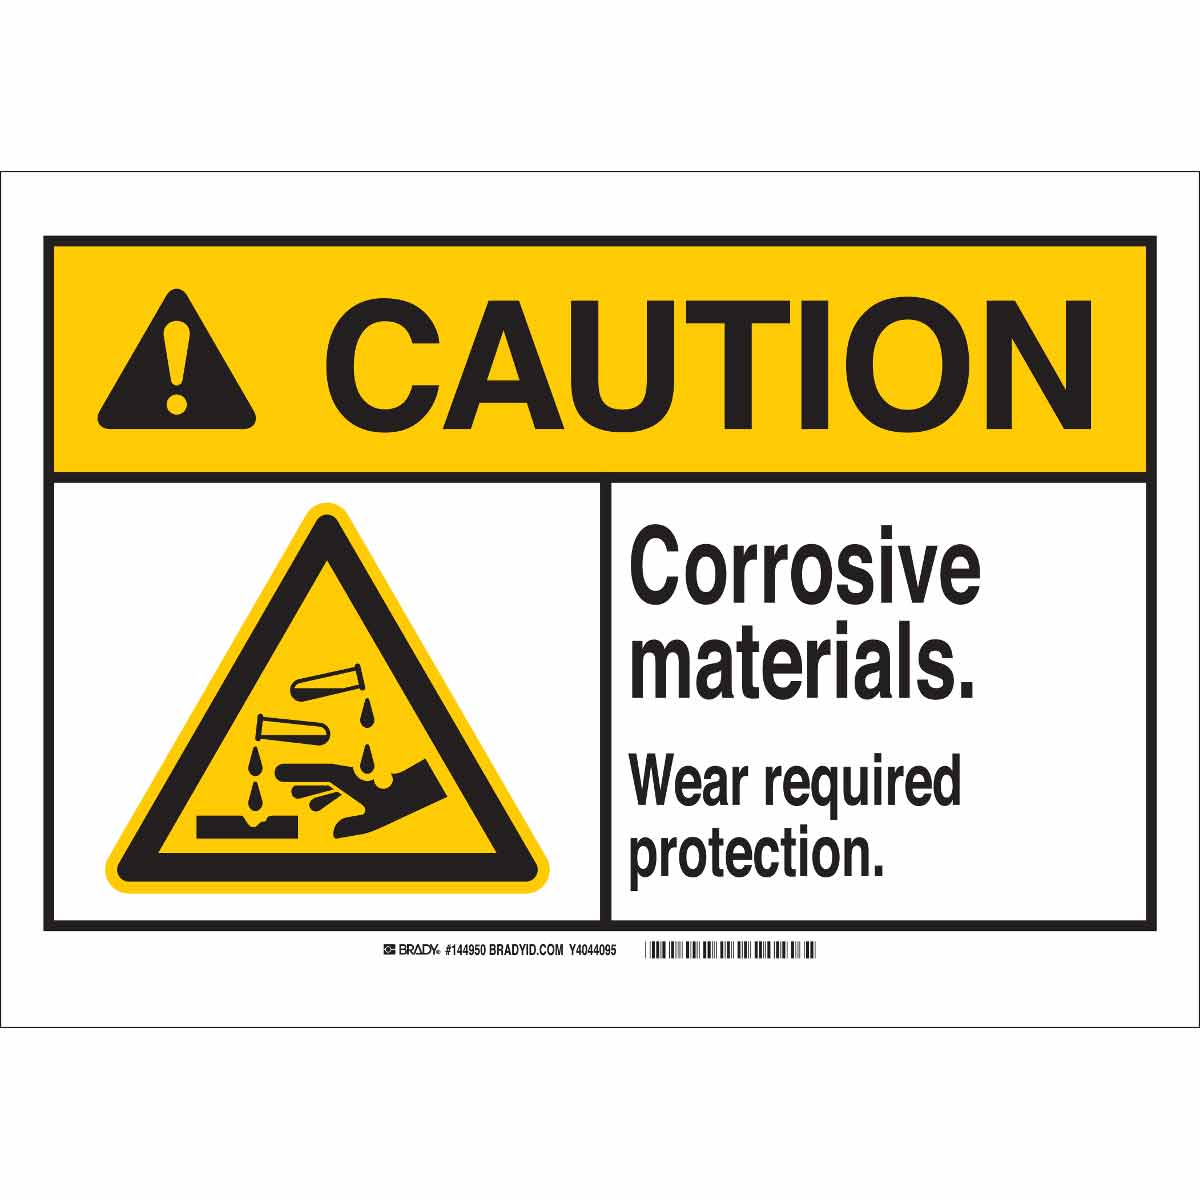 Details about   "CAUTION CORROSIVE MATERIALS....." SIGN INDUSTRIAL BUSINESS FACILITY SIGNS 